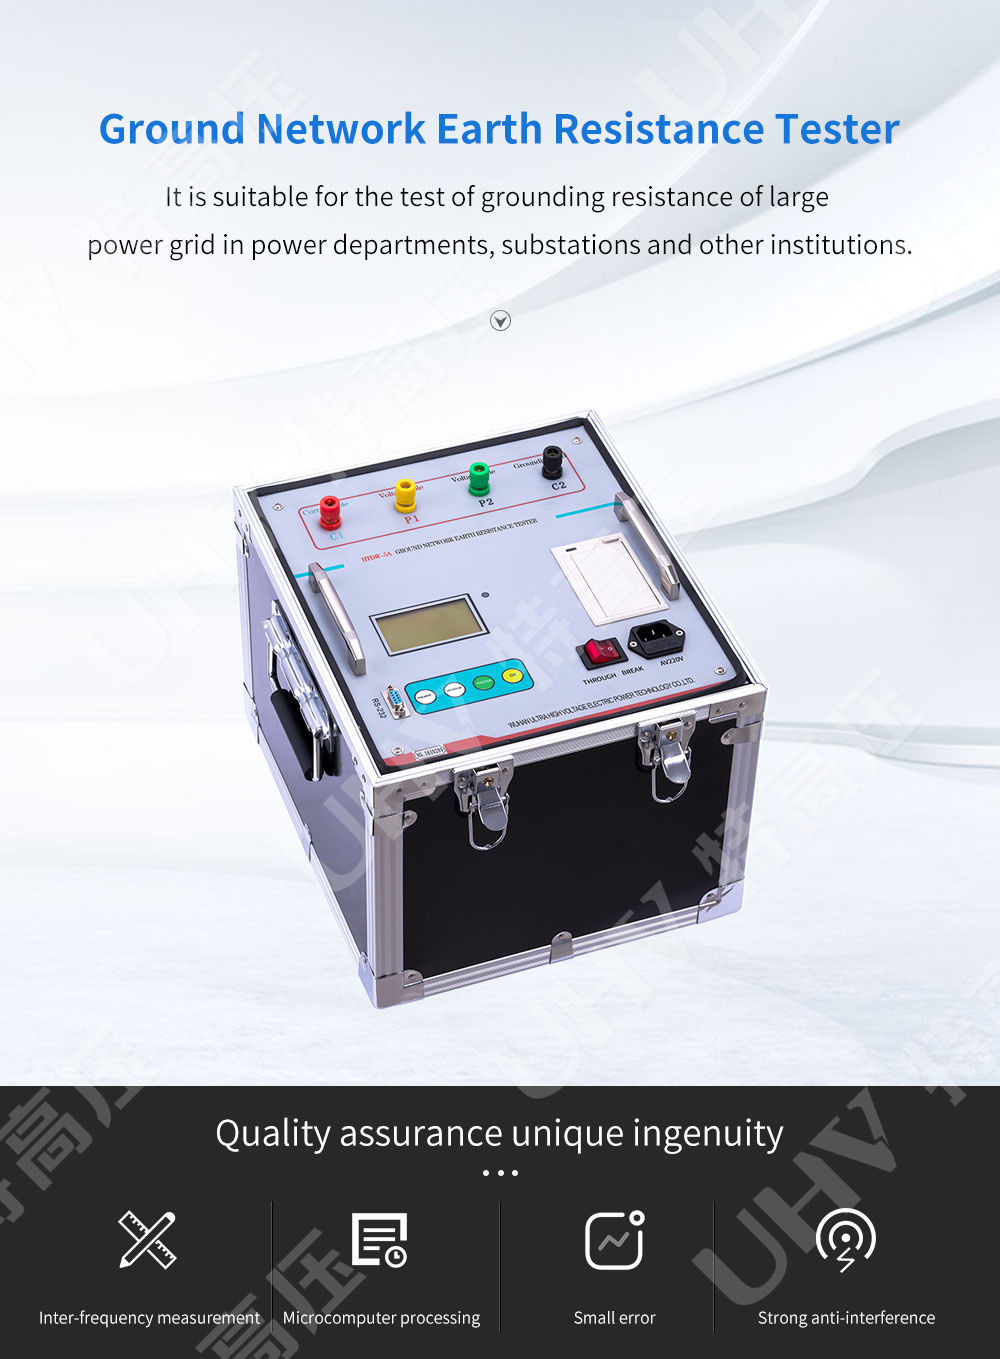 Ground Network Earth Resistance Tester